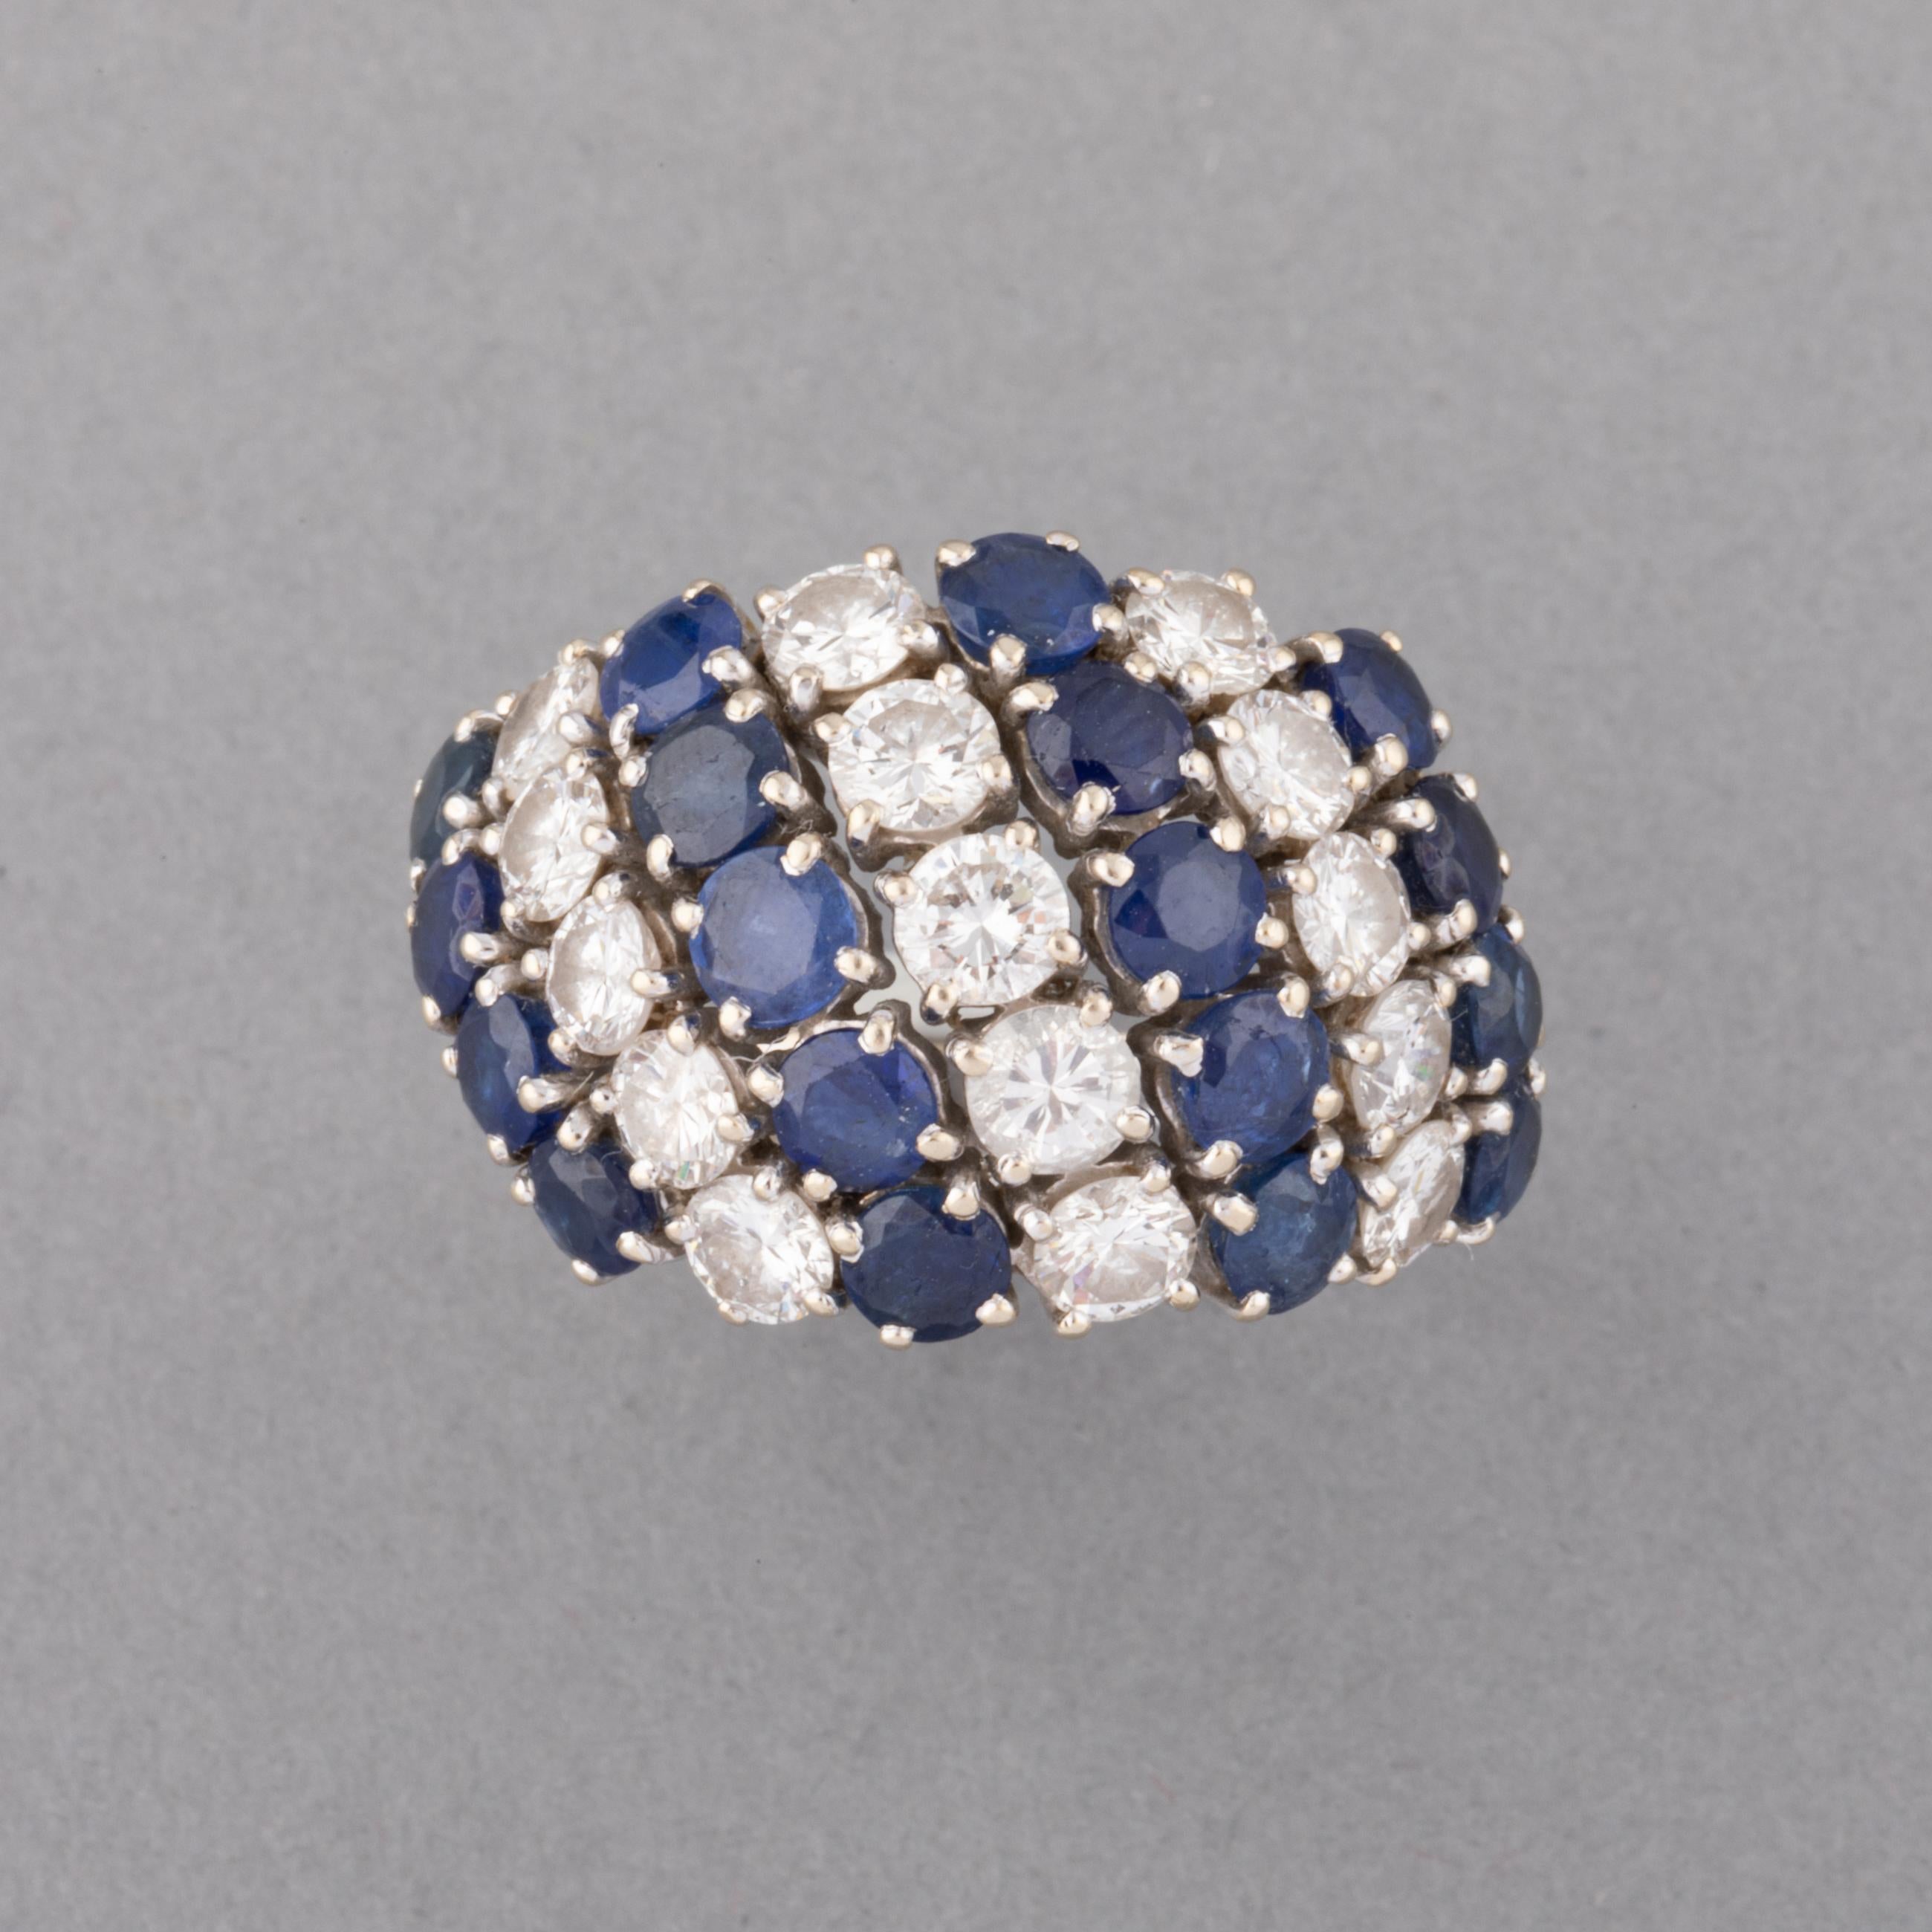 One very lovely vintage ring, made in France circa 1960.
Made in white gold 18k and set with beautiful diamonds and sapphires. The diamonds weights approximately 2.50 carats of good quality.
Ring size is 52 or 6 usa.
Weight:3.23 grams